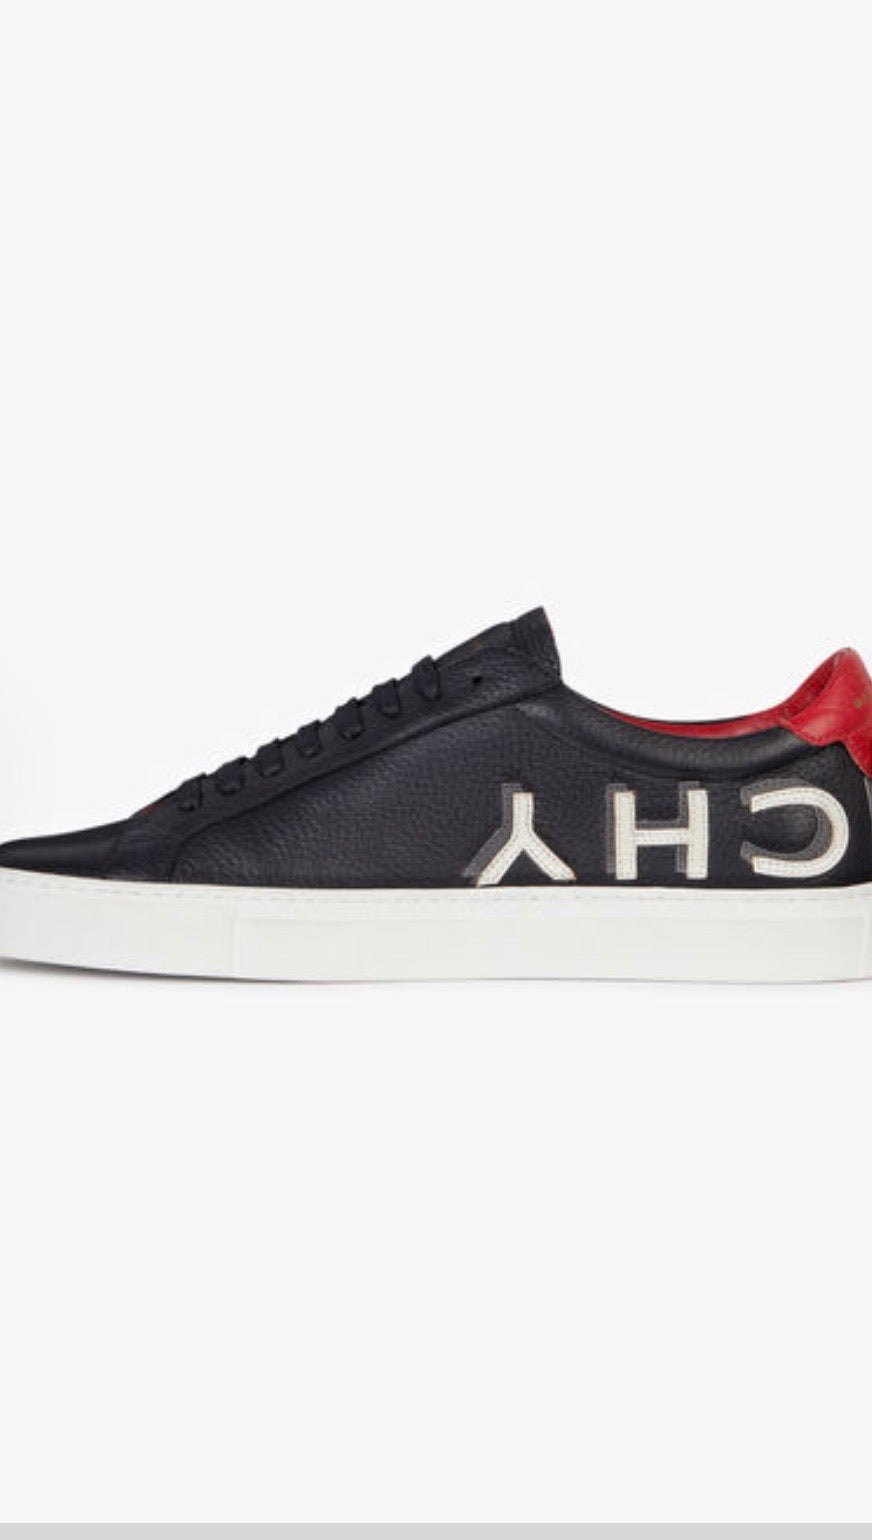 MEN GIVENCHY REVERSE SNEAKERS IN LEATHER